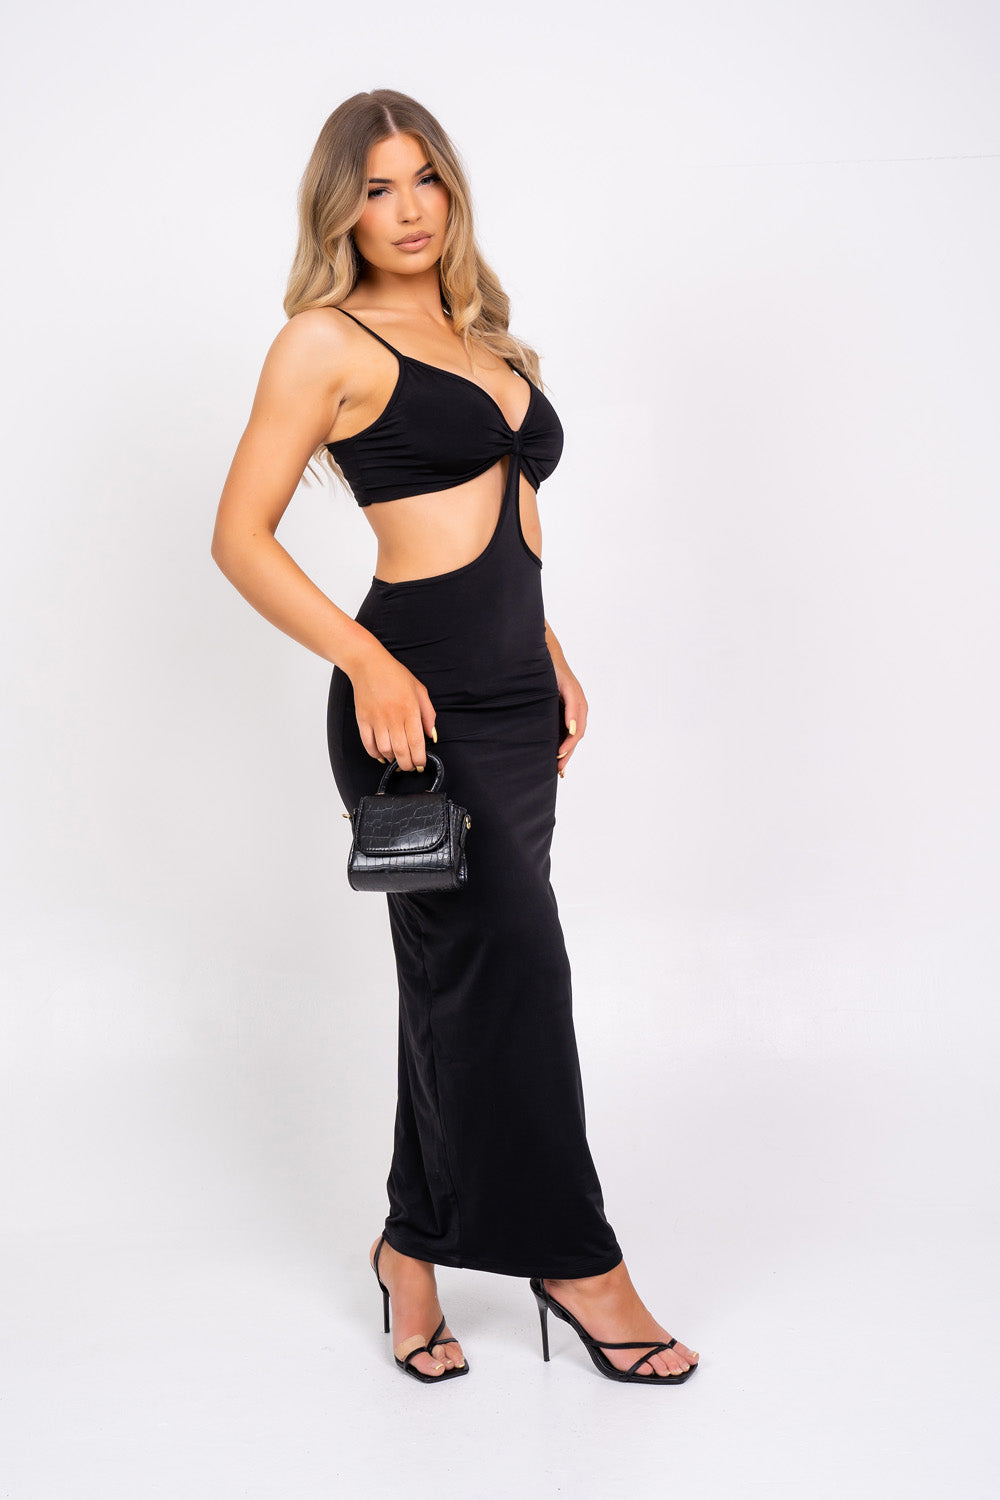 Over It Black Slinky Bodycon Strappy Cut Out Maxi Dress